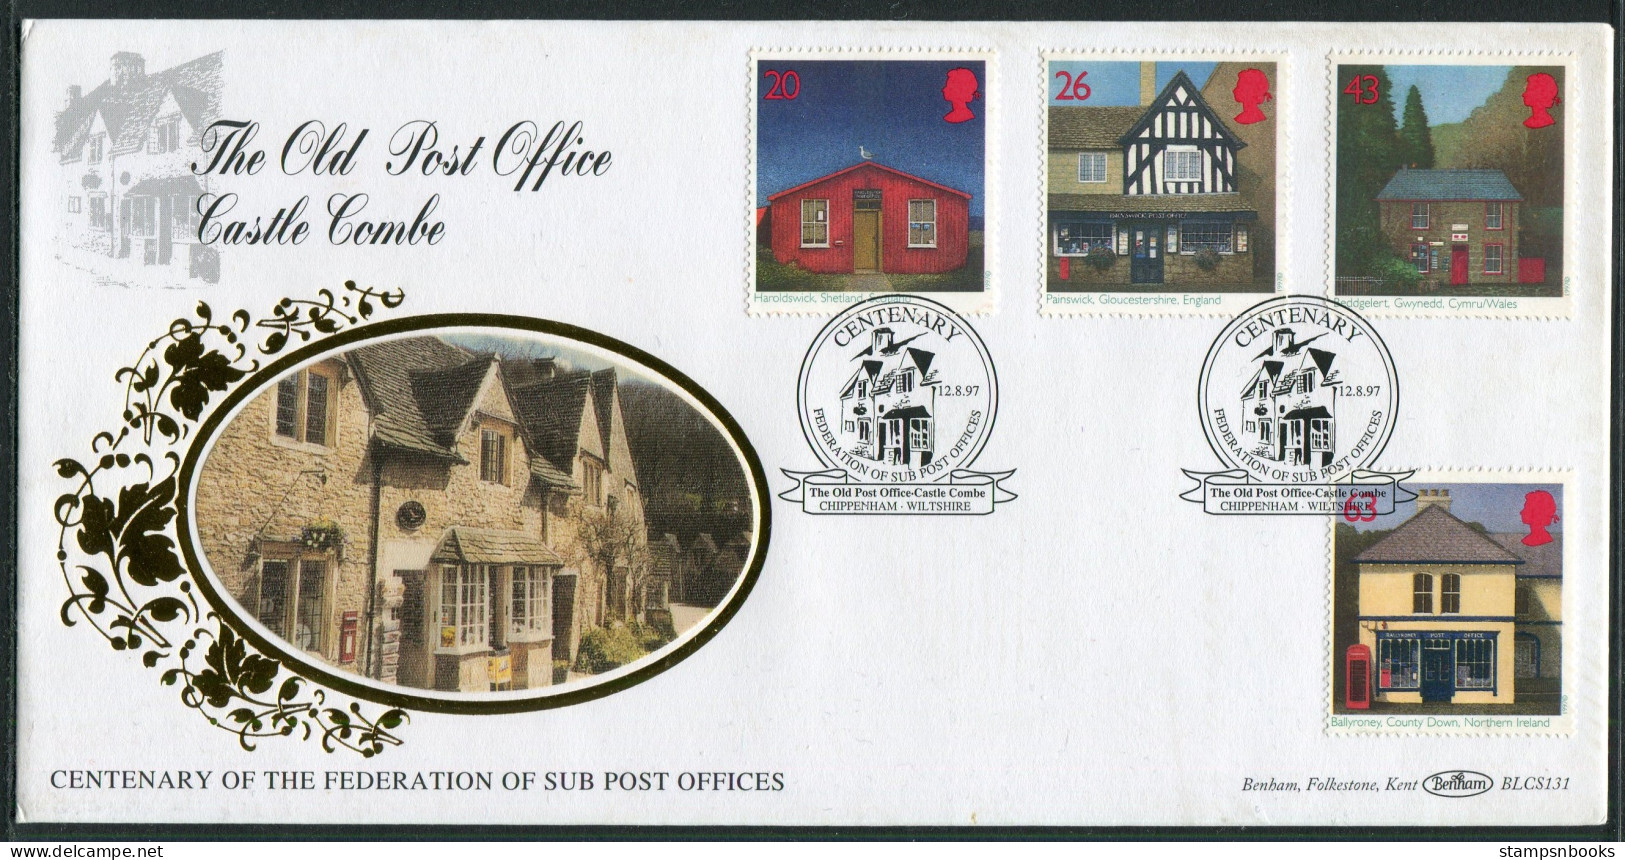 1997 GB Post Offices First Day Cover, Castle Combe, Wiltshire Benham BLCS 131 FDC - 1991-2000 Decimal Issues